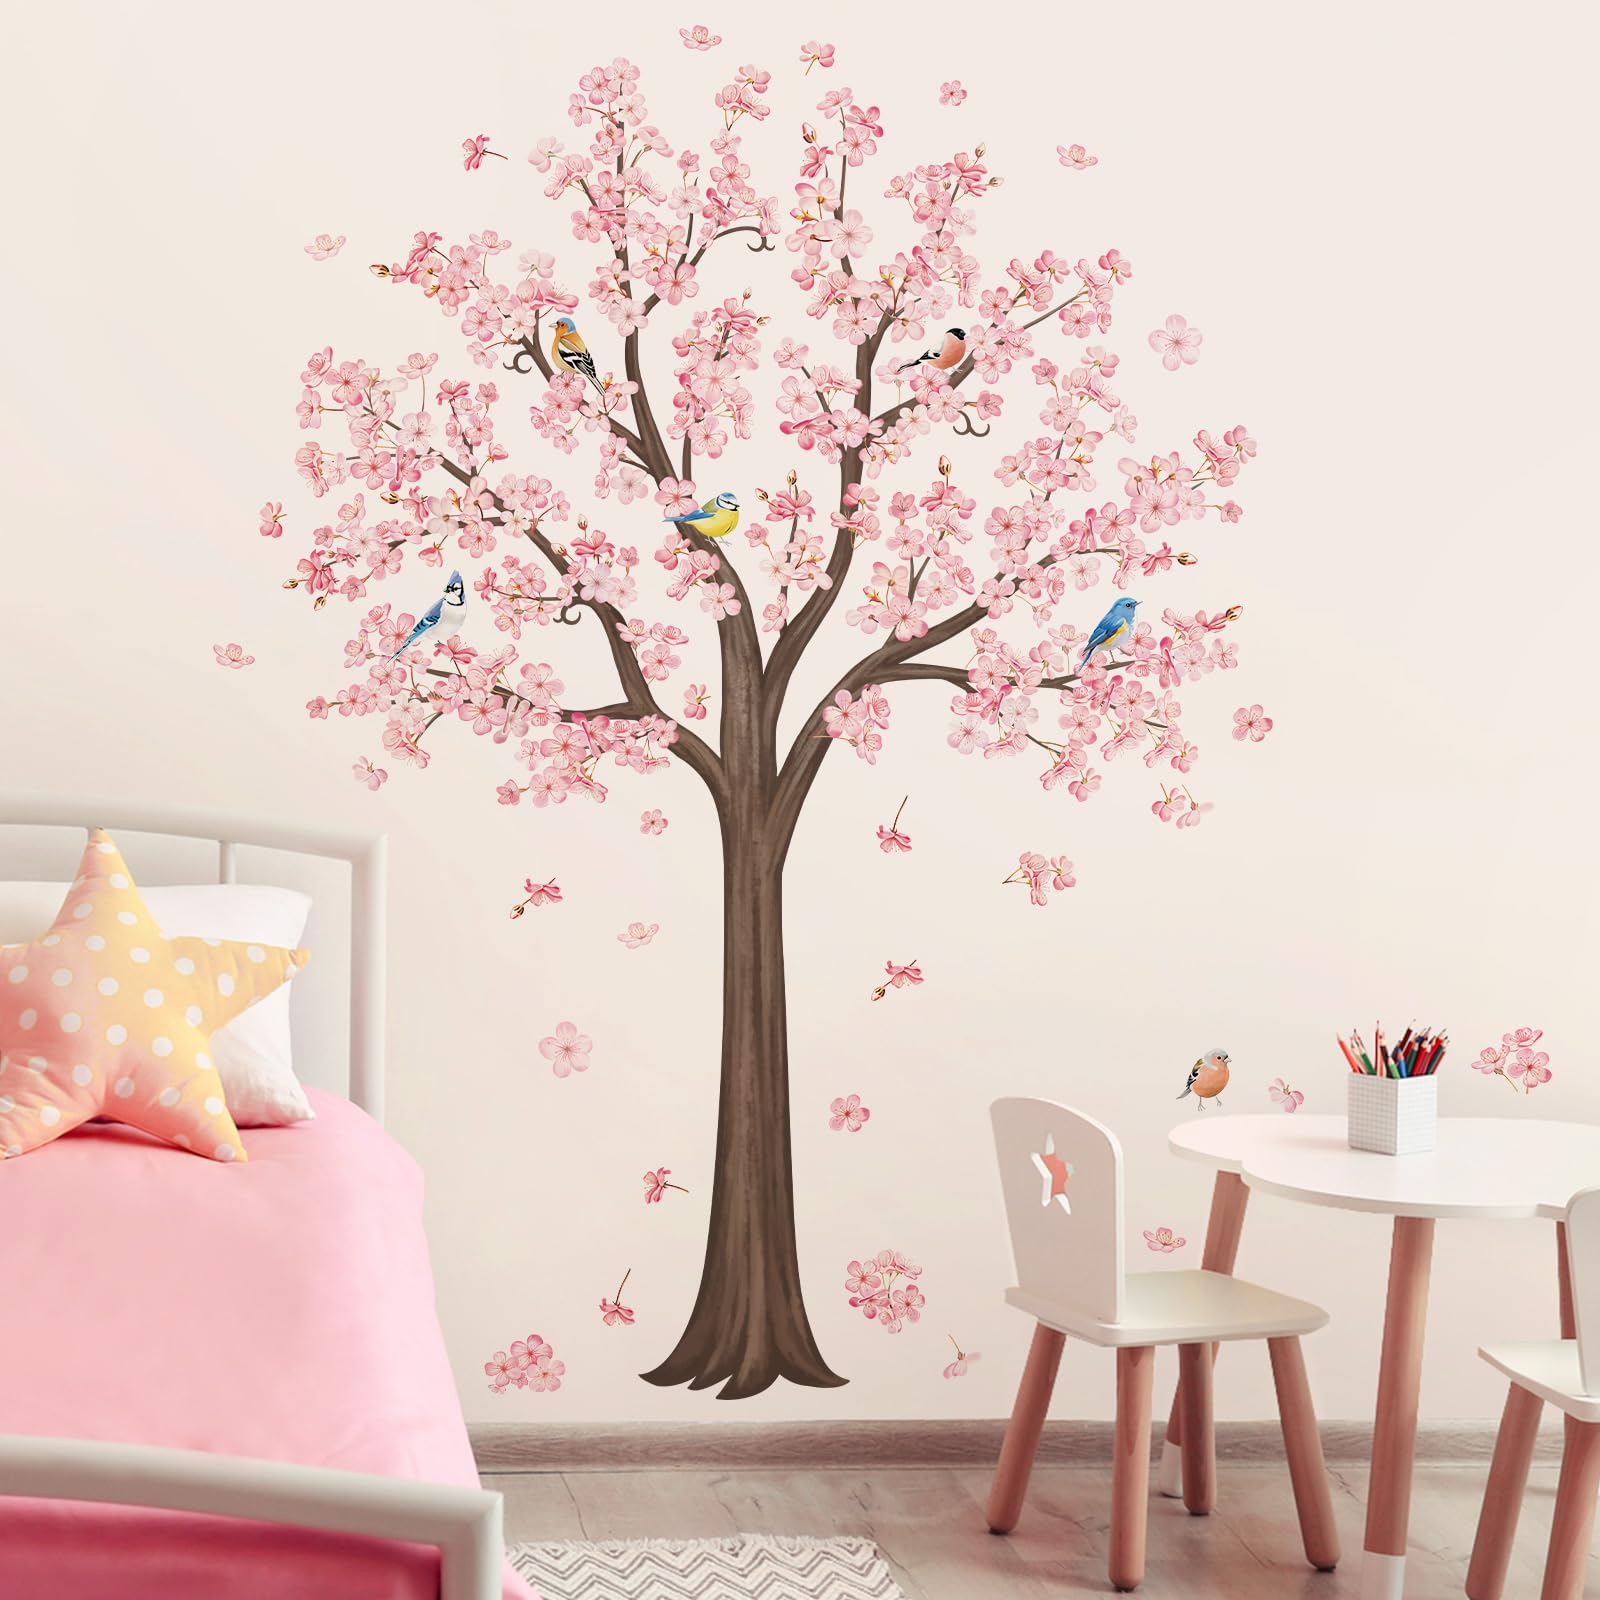 decalmile Large Pink Blossom Tree Wall Decals Flower Birds Branch Wall Stickers Living Room Bedroom Baby Nursery Wall Decor（H:128cm/50 Inches）